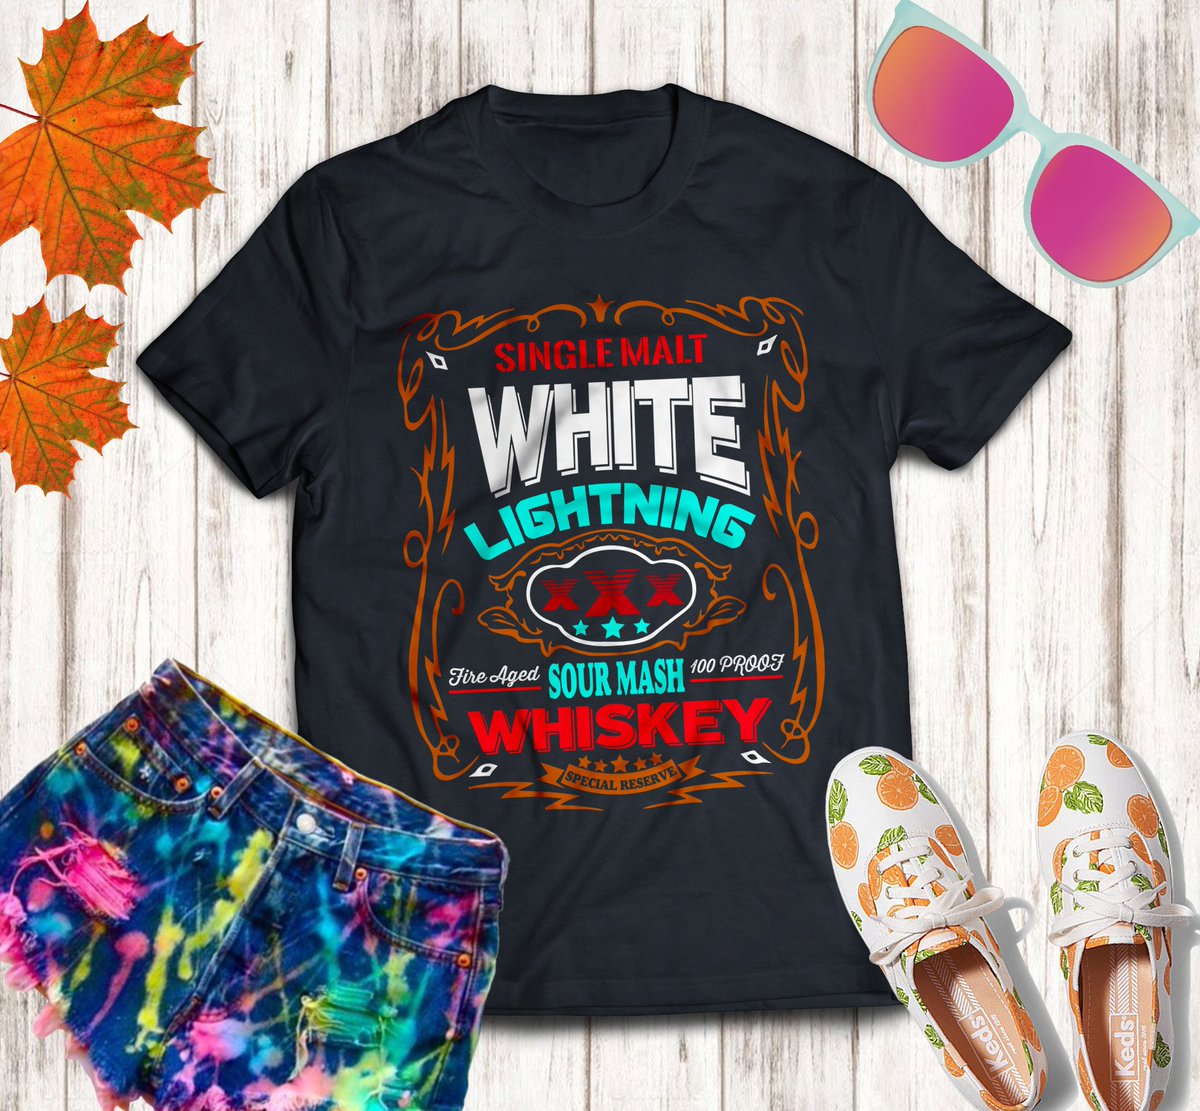 👉 Whiskey T-shirt for Men's and Women's 2019.
👉 Order here: bit.ly/2FXPx4p
Tip: BUY 2 or MORE to SAVE on Shipping!!
#whiskeytshirt #funnytshirt #nicetshirt #familytshirt #coupletshirt #kingandqueen #onlinetshirt #hunting #fishing #BillyRayCyrus #CoolVideo